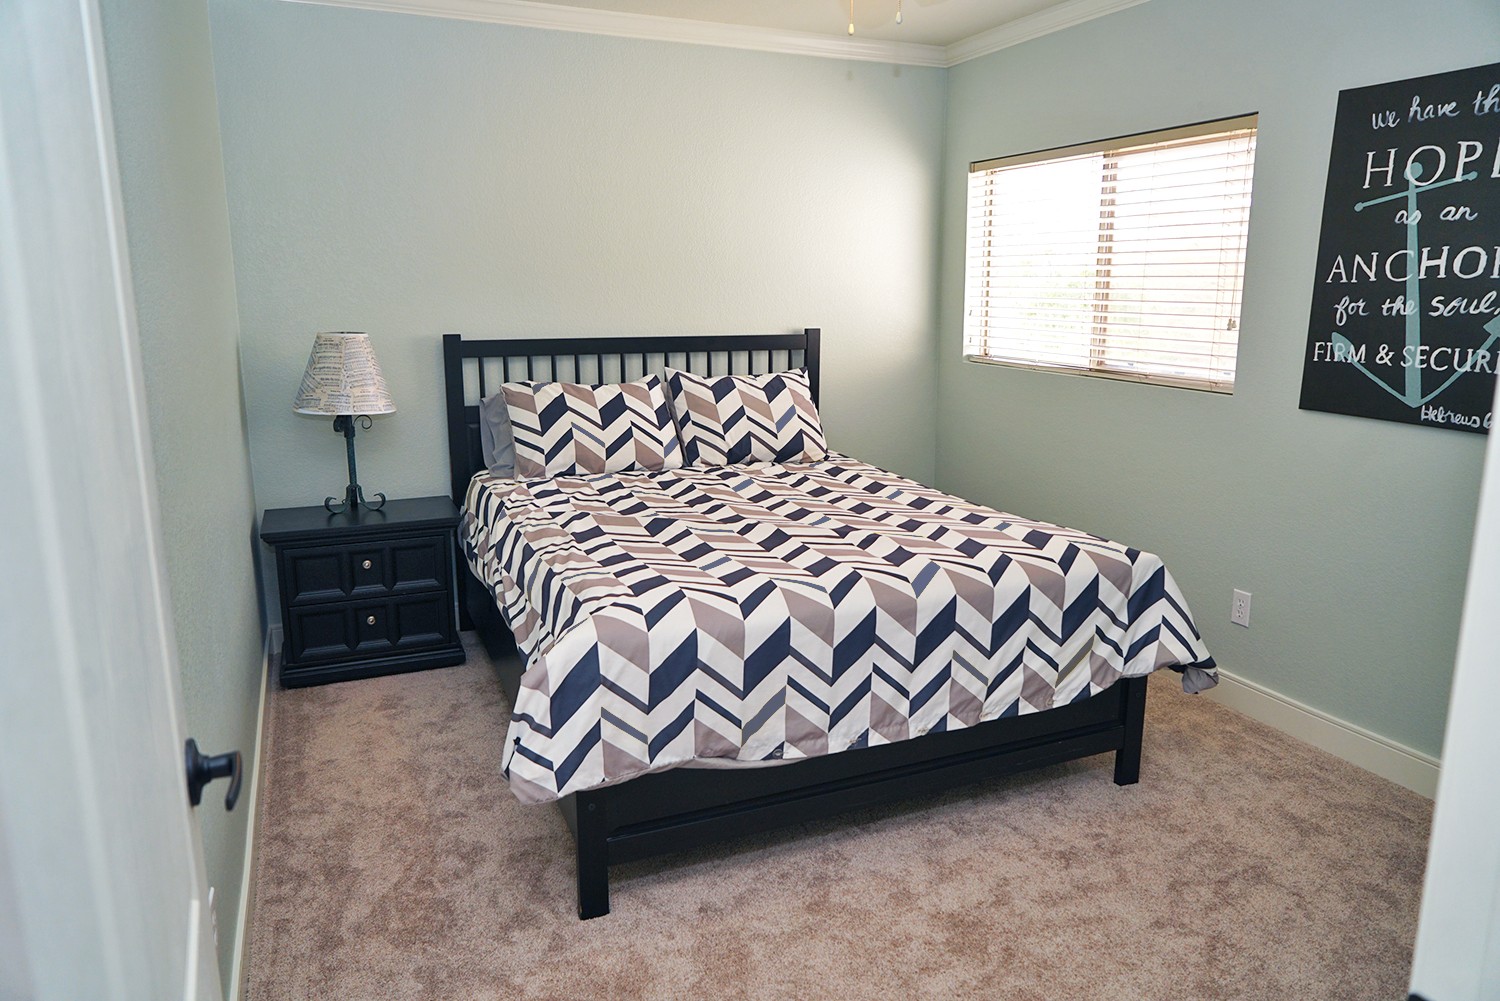 Wall color: Sea Salt by Sherwin Williams